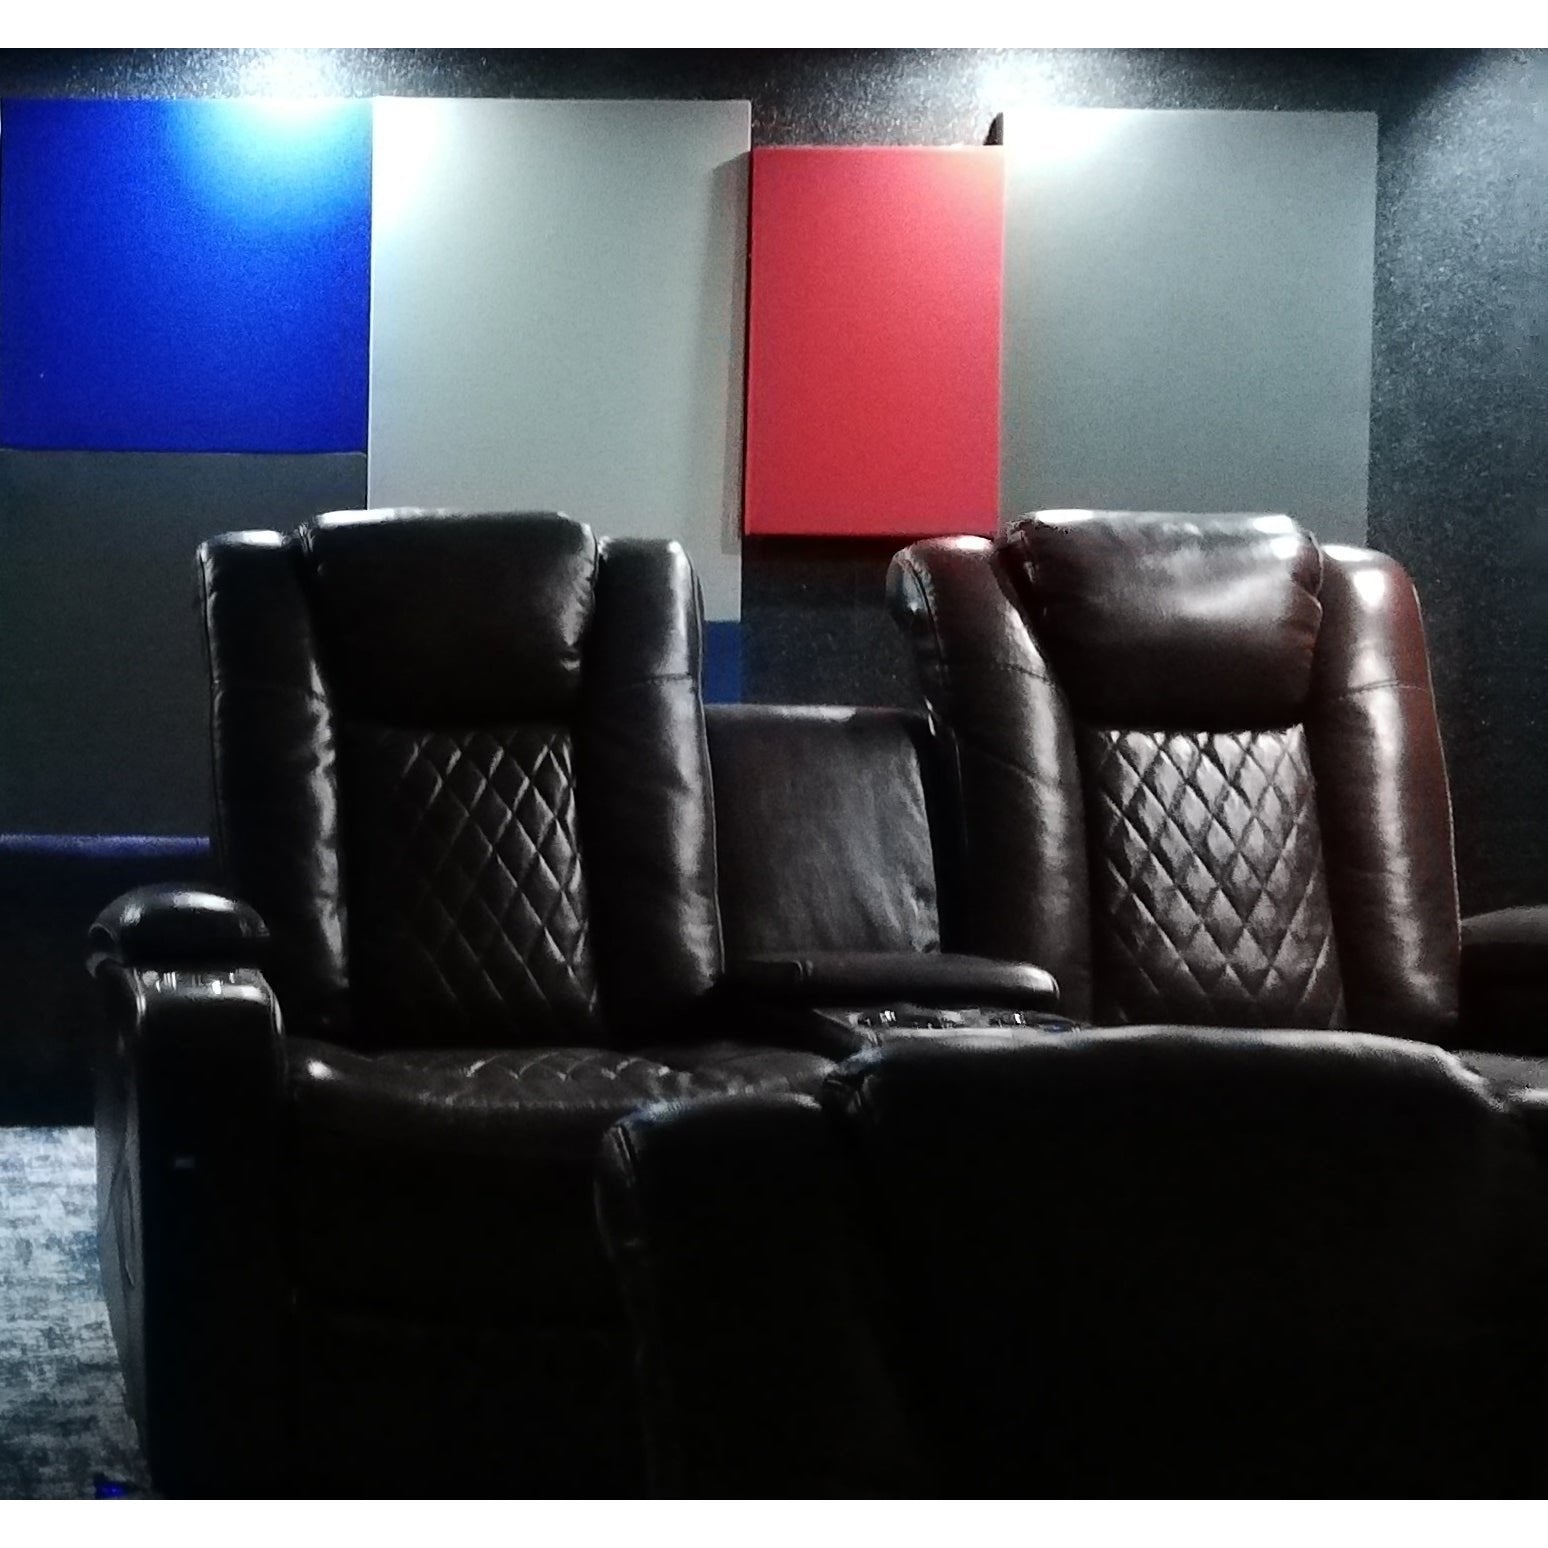 Home cinema installation with acoustic wall panels